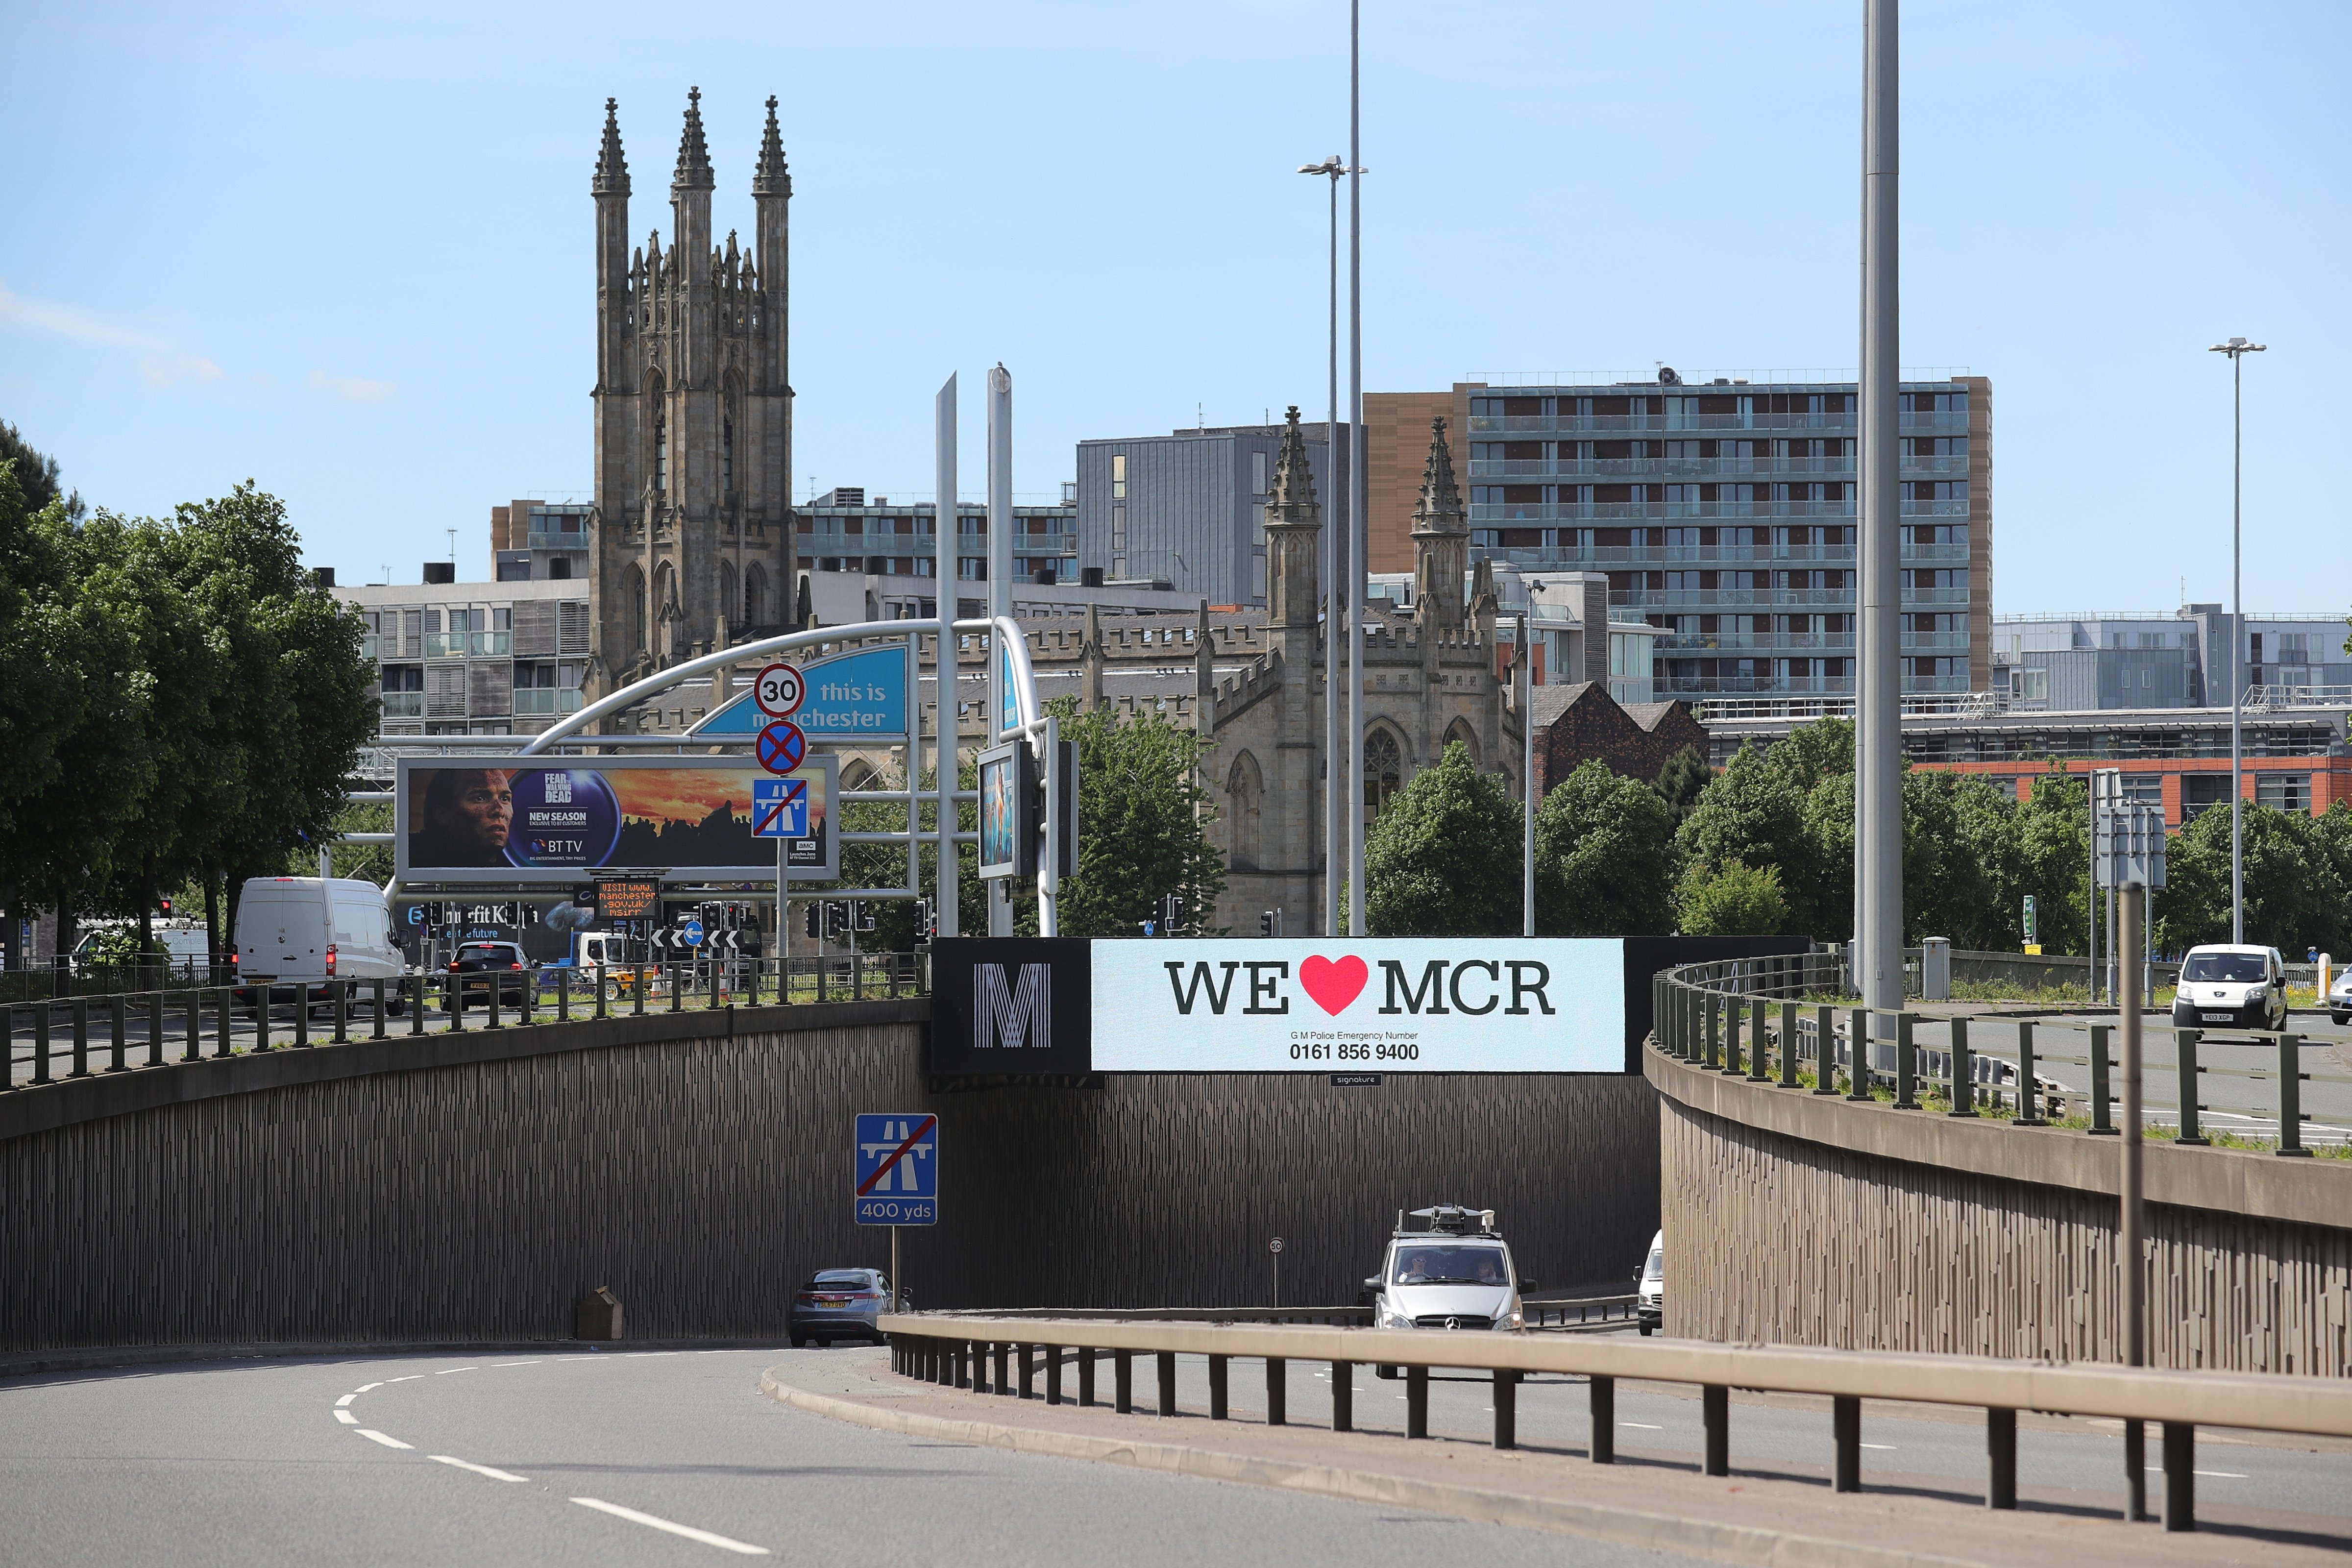 A giant TV screen displays the 'We Love Manchester" logo and police emergency incident telephone number after last nights terrorist attack, May 23, 2017 in Manchester, England. (Christopher Furlong—Getty Images)